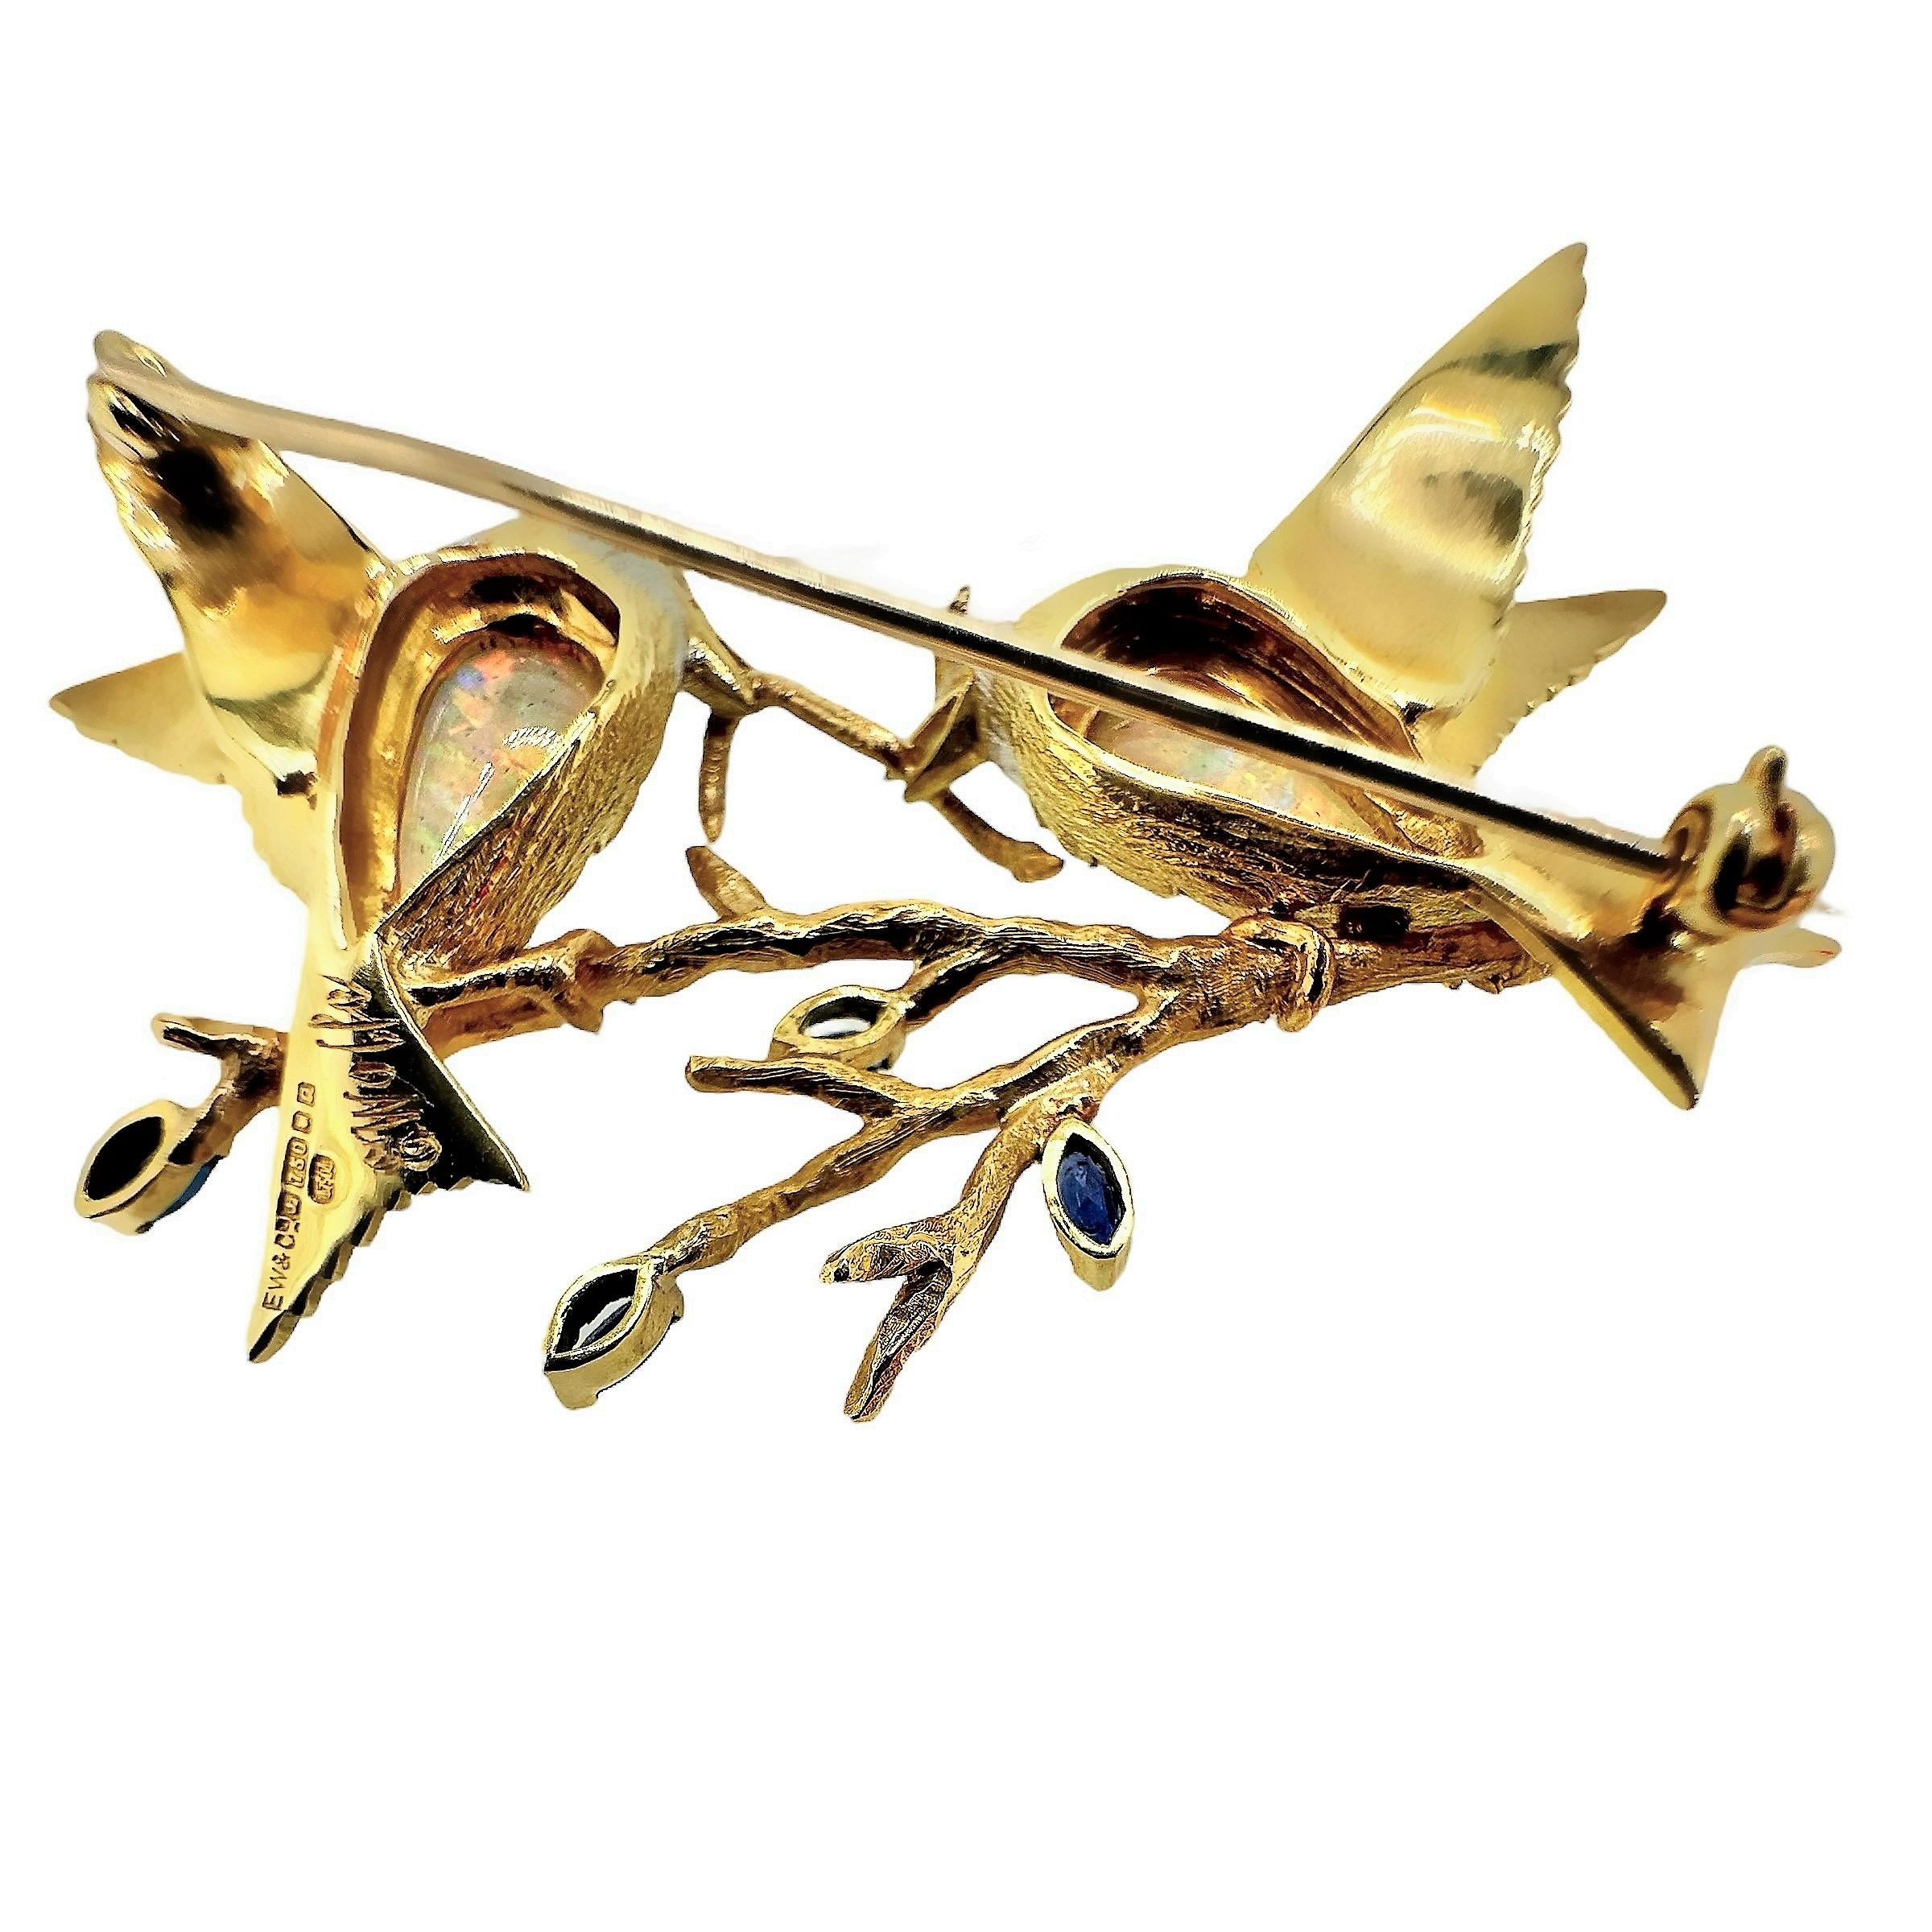 This extremely well detailed E. Wolfe signed aviary brooch, from the workshop of the well respected English Jeweler, depicts two birds on a branch either sharing or competing for a hapless worm. Extreme attention has been paid to the texture of each